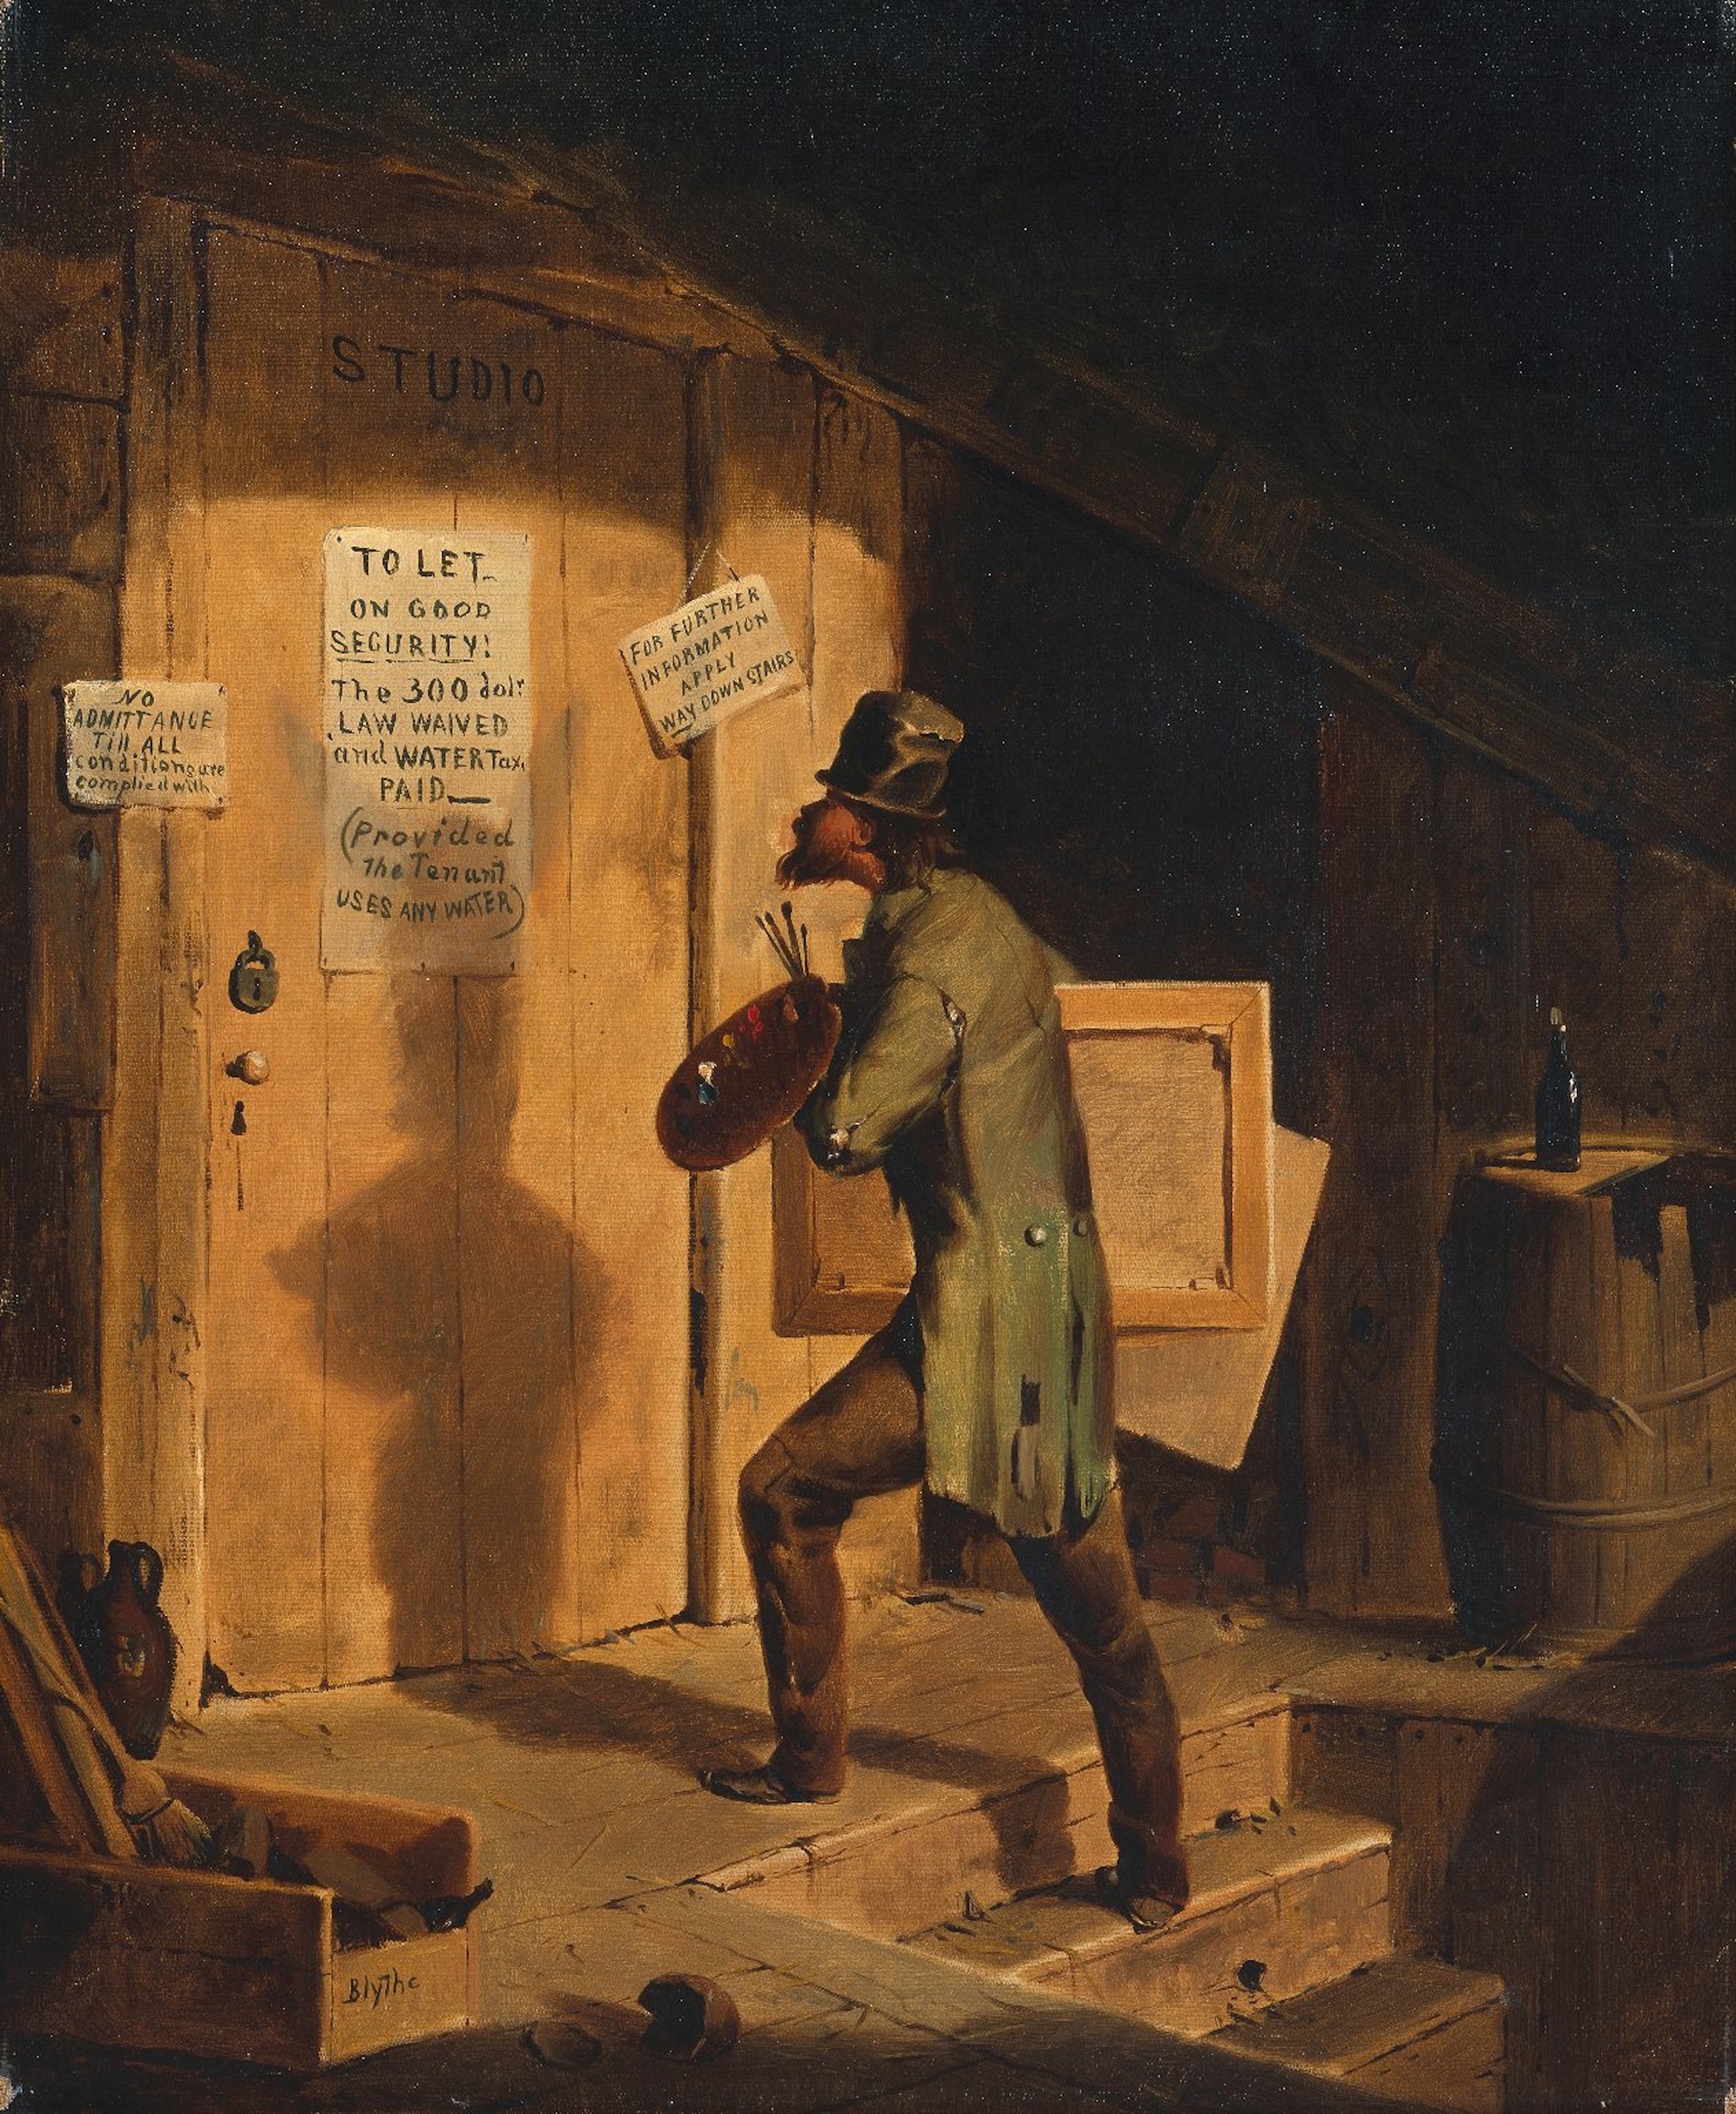 Oil painting of a man in a ragged top hat and coat, holding a painting palette and brushes, looking at a locked wooden door marked "Studio." A sign onthe door reads "To Let - / On good security"